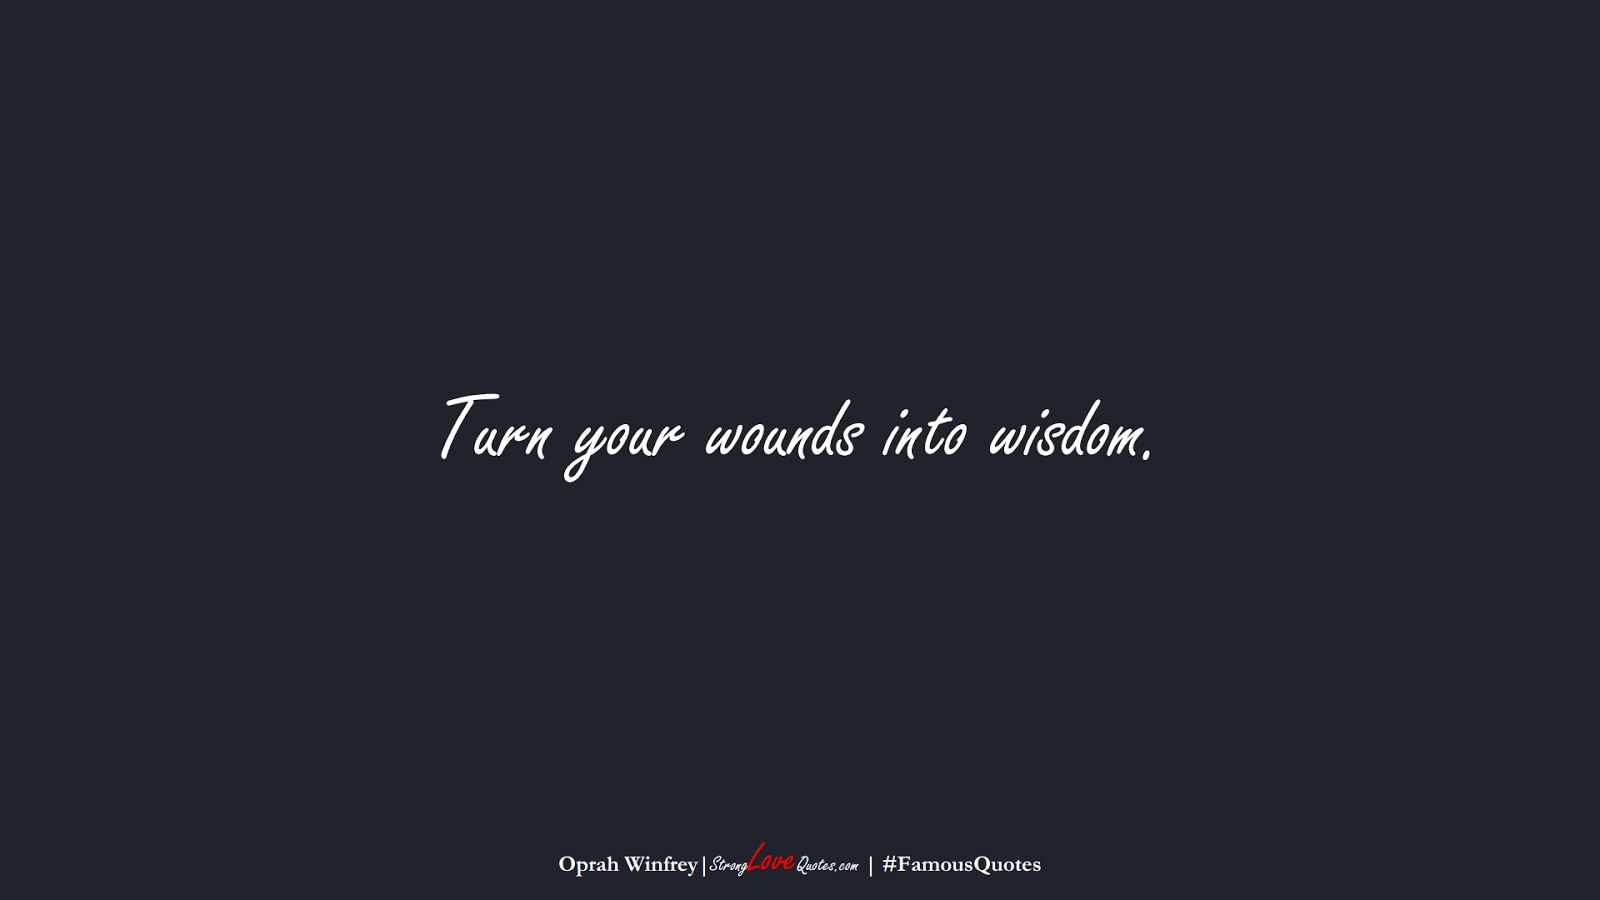 Turn your wounds into wisdom. (Oprah Winfrey);  #FamousQuotes